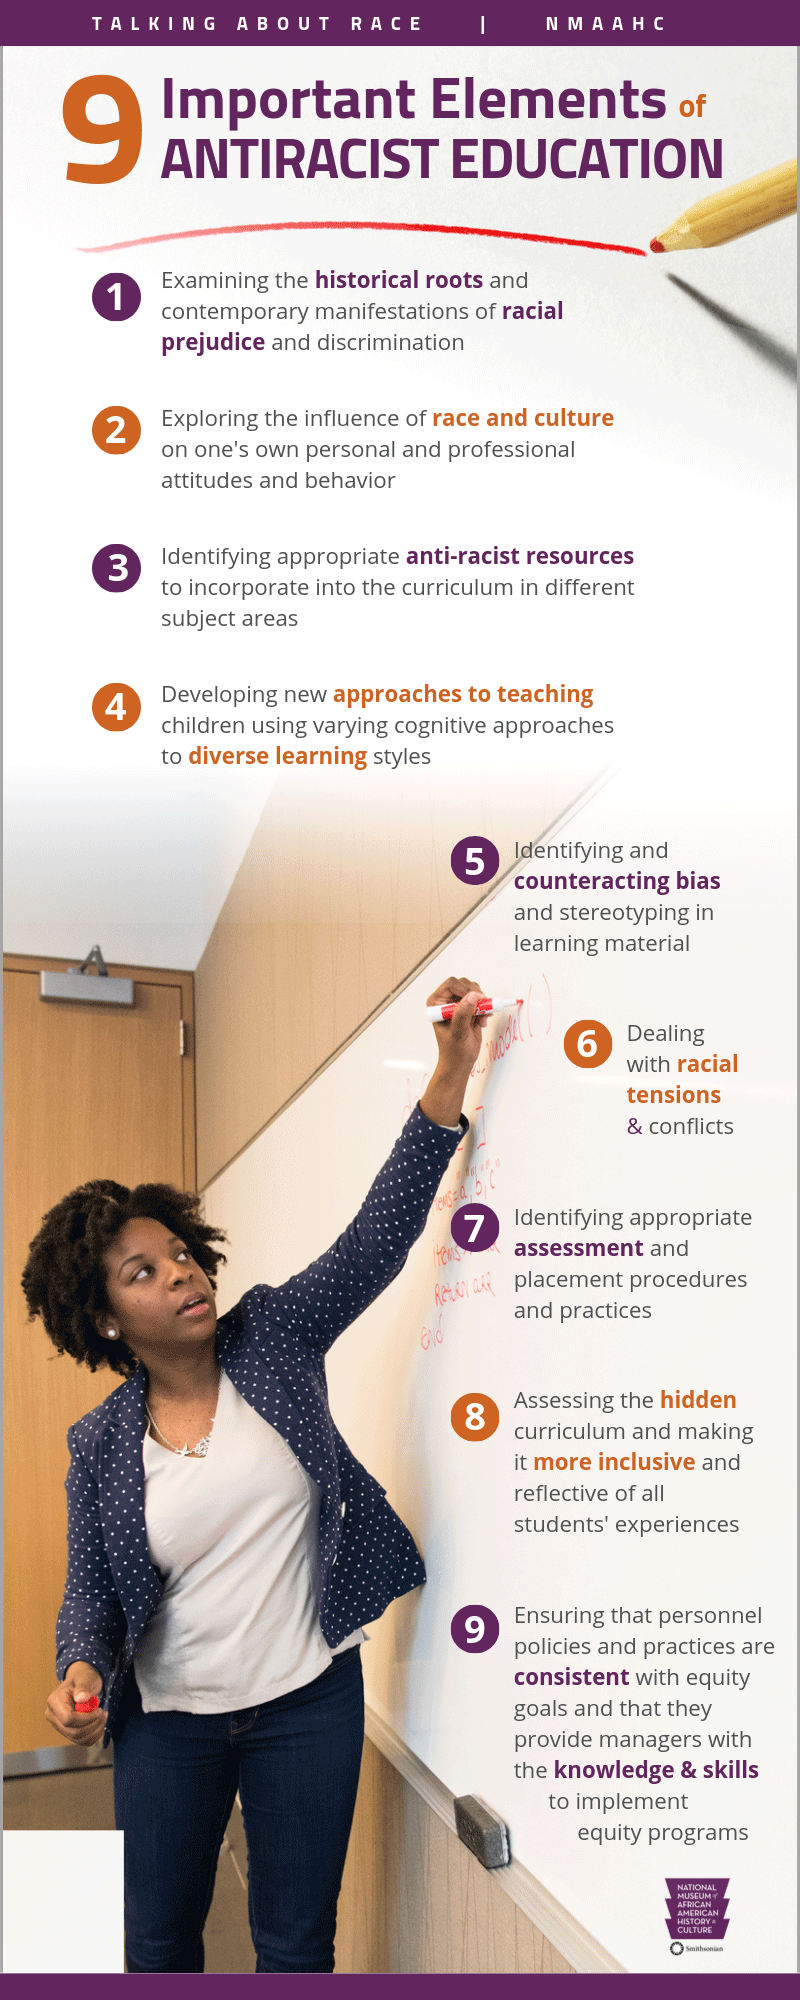 An image of a Black woman in a dark blue blazer with polka dots, white shirt and dark blue slacks. She is writing on a whiteboard. There are 9 numbers alternating in purple and orange outlining important elements of antiracist education.